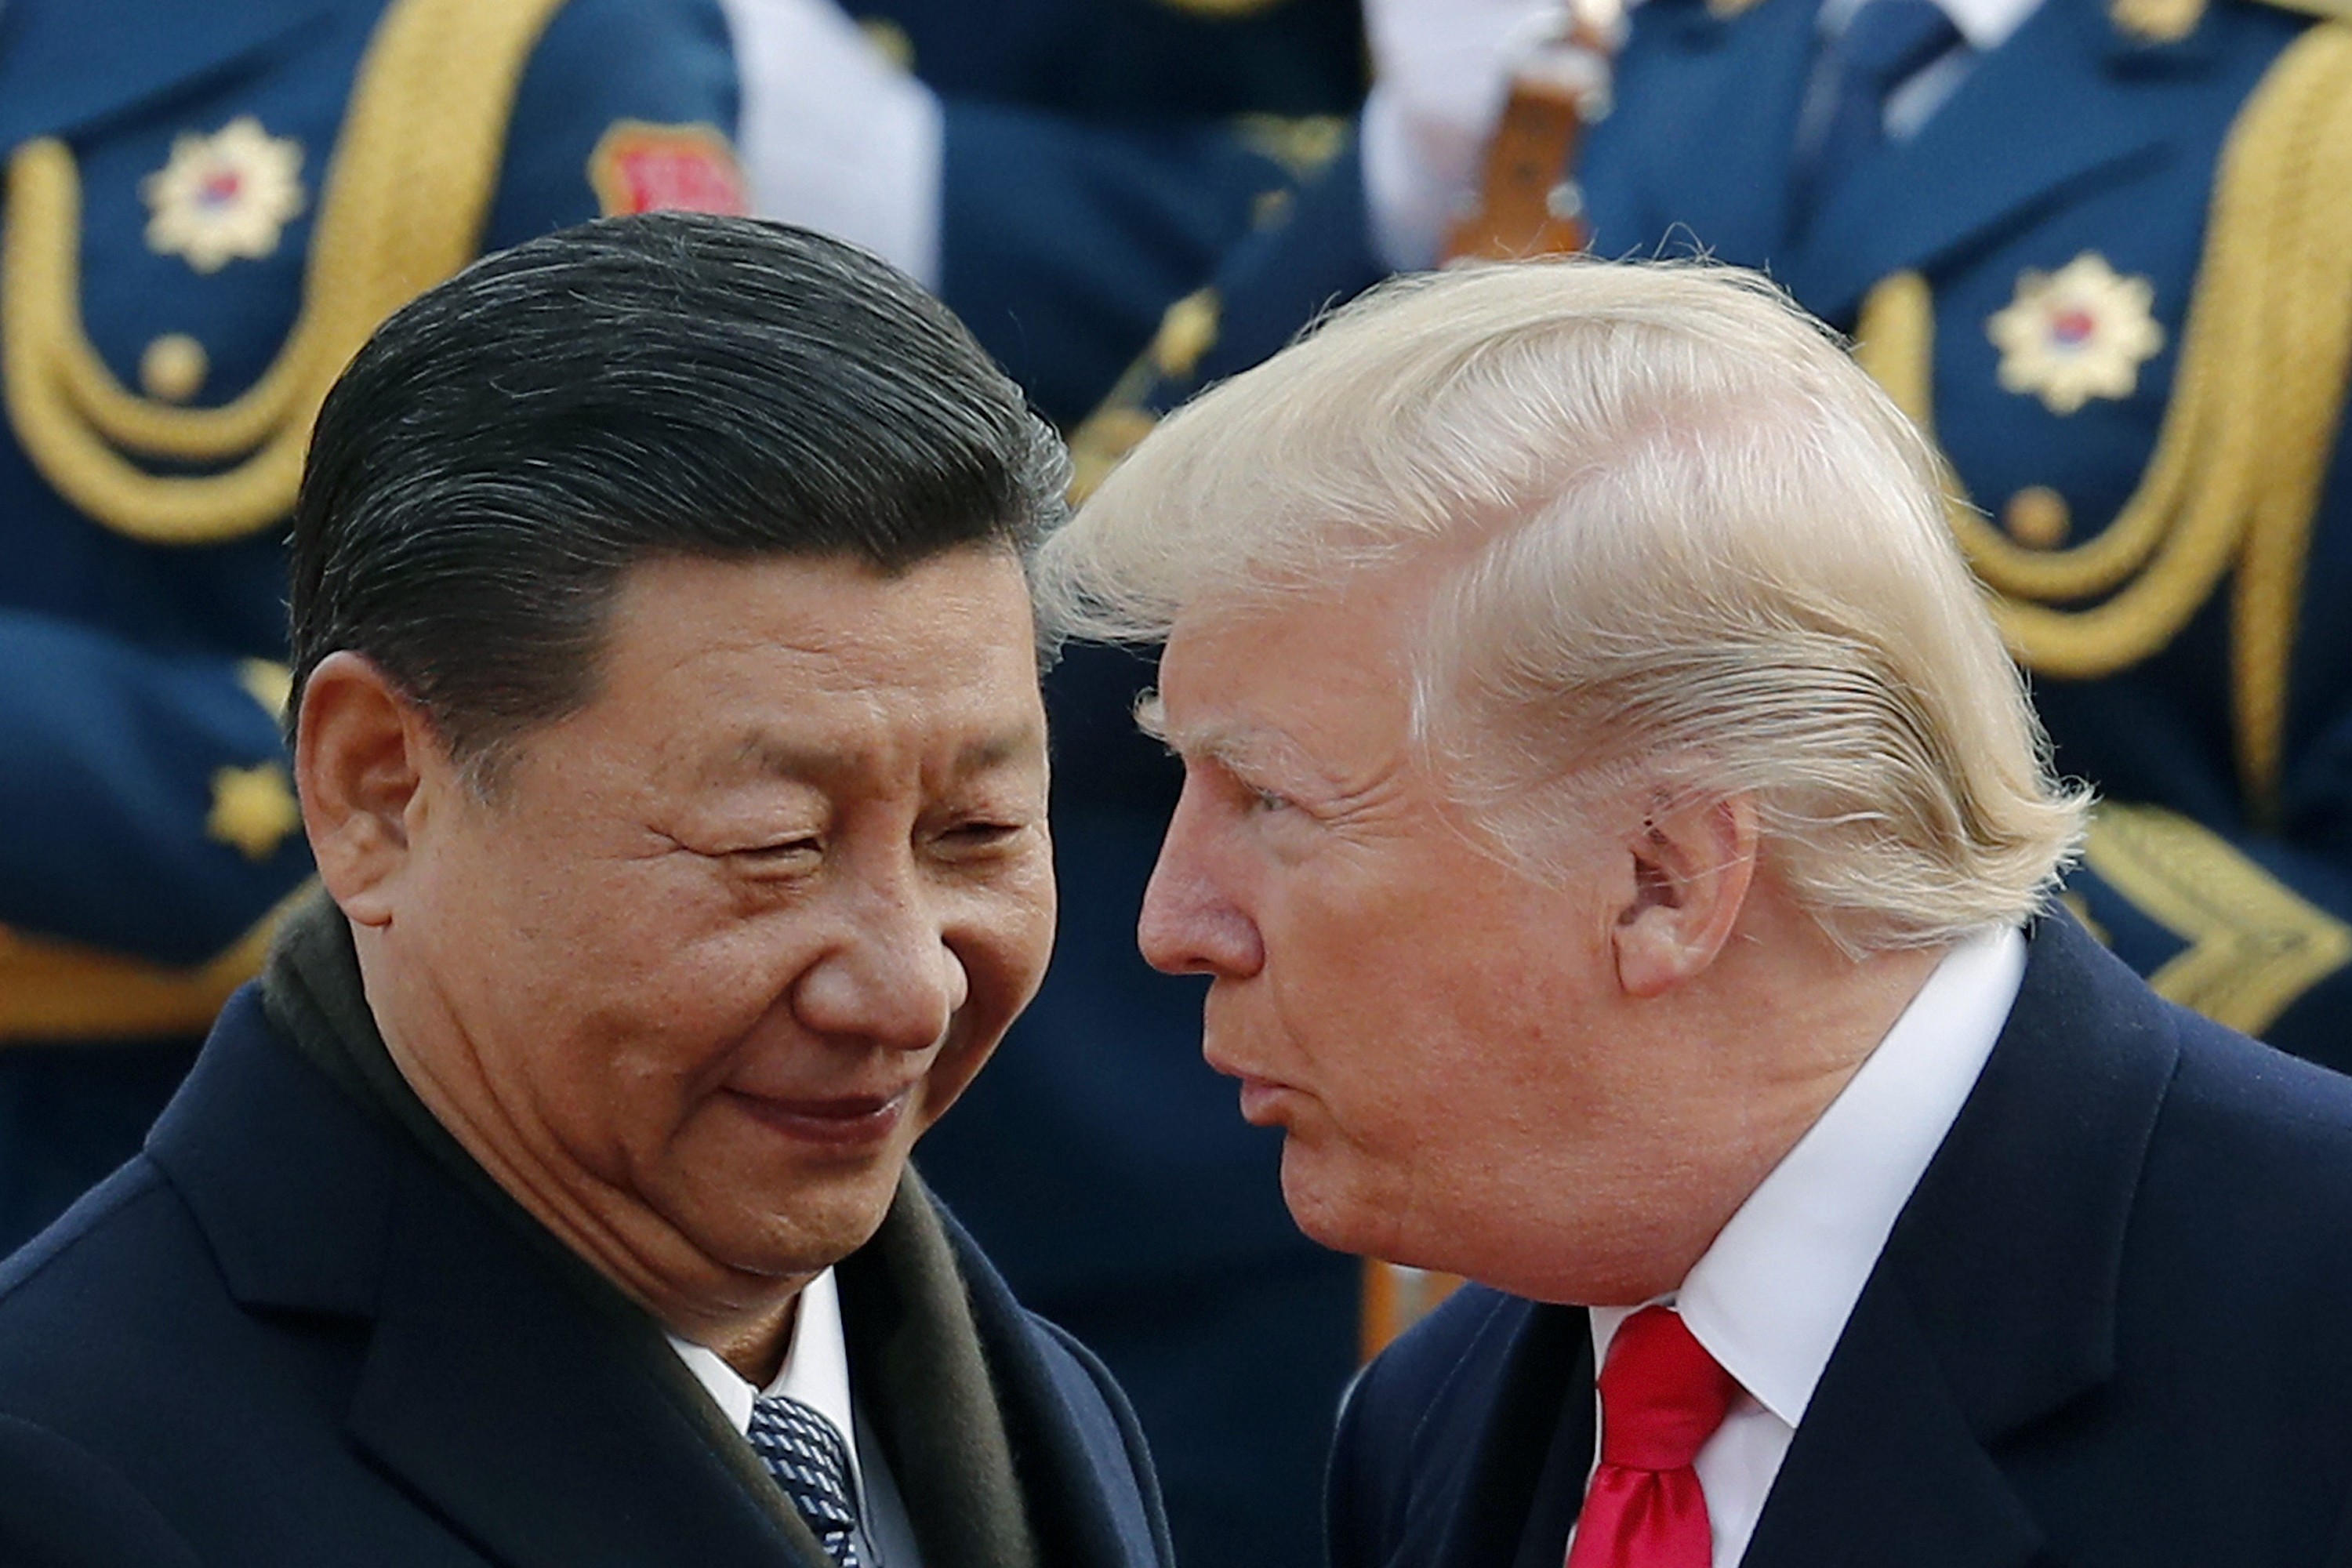 Chinese President Xi Jinping and his US counterpart Donald Trump are expected to negotiate terms to relieve trade tensions on the sidelines of the G20 summit in Osaka. Photo: AP